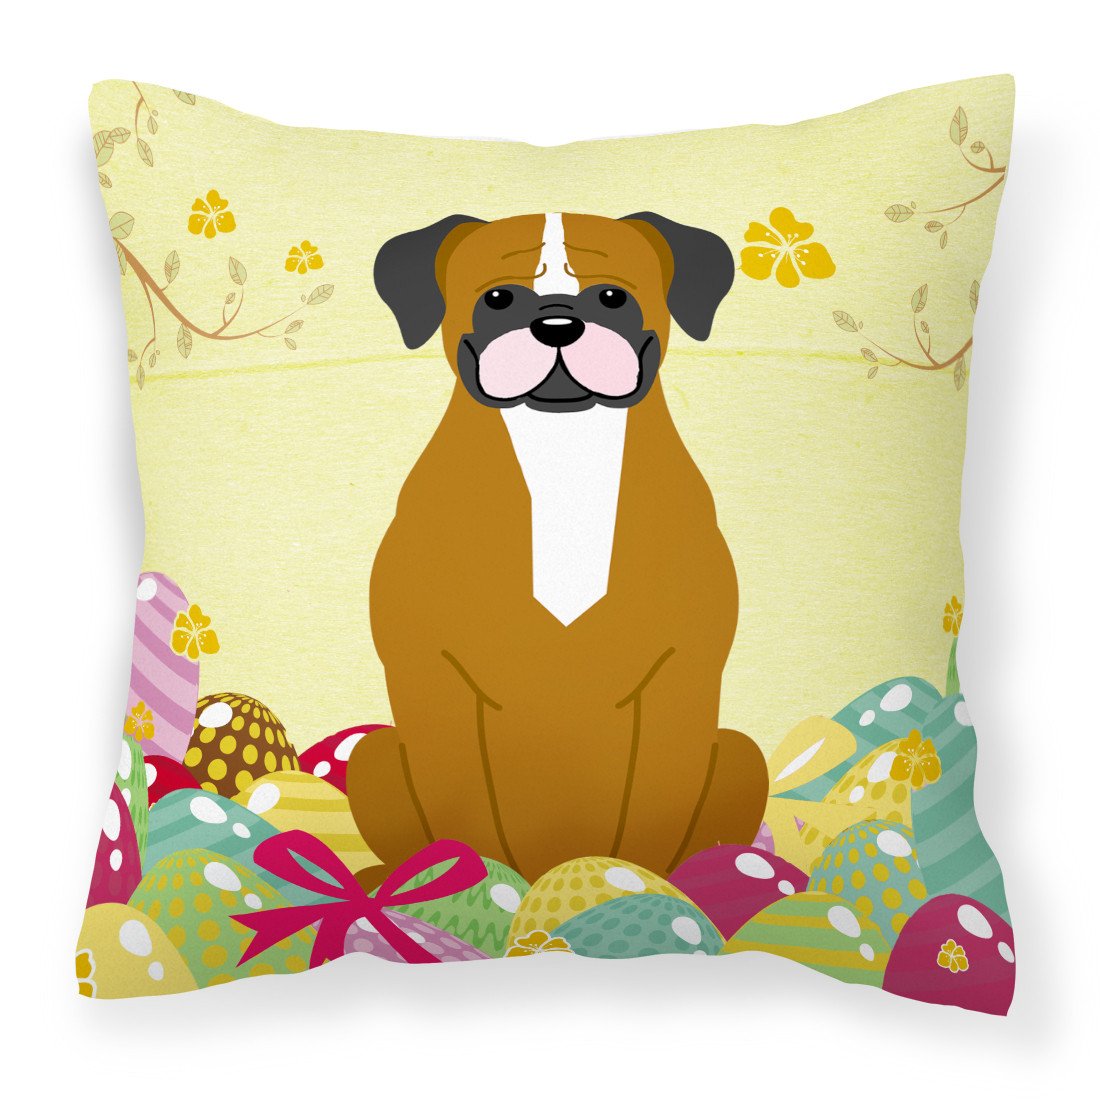 Easter Eggs Flashy Fawn Boxer Fabric Decorative Pillow BB6116PW1818 by Caroline's Treasures